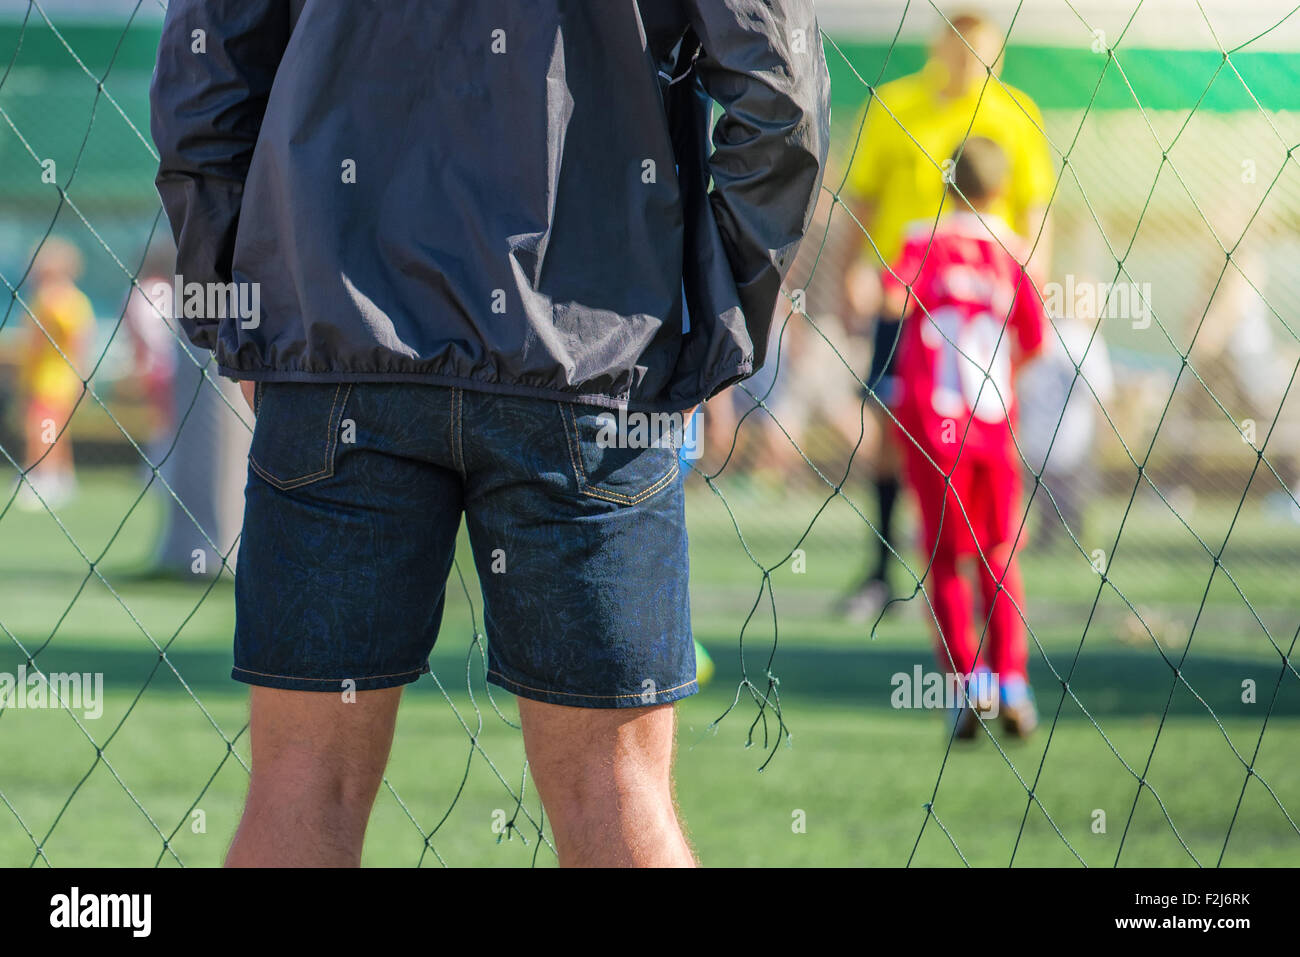 Father watching son playing soccer game, kids playing football, selective focus Stock Photo